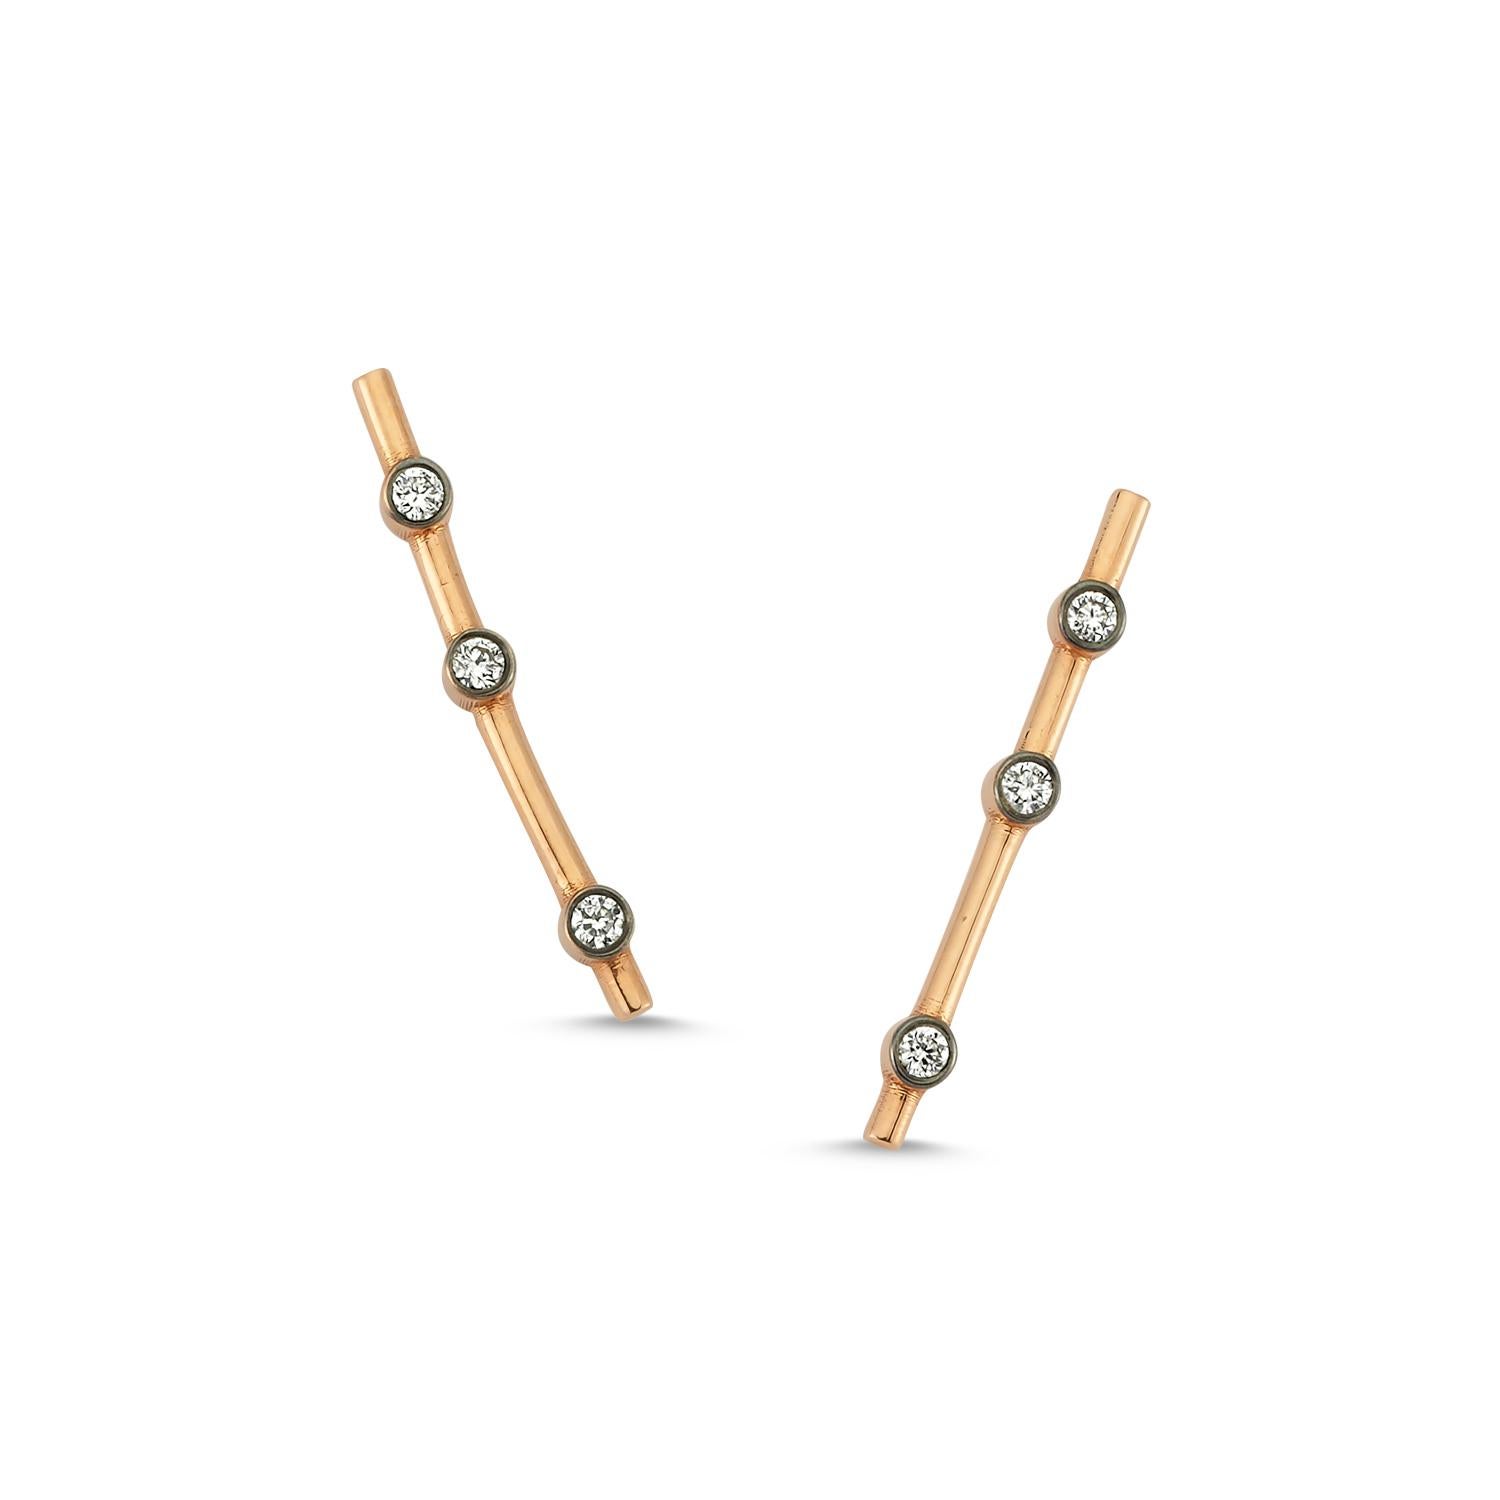 Bar stud earring with 3 single stone white diamond (single) by selda jewellery

Additional Information:-
Collection: Thunder collection
14K Rose gold
0.06 ct White diamond
Length 2cm